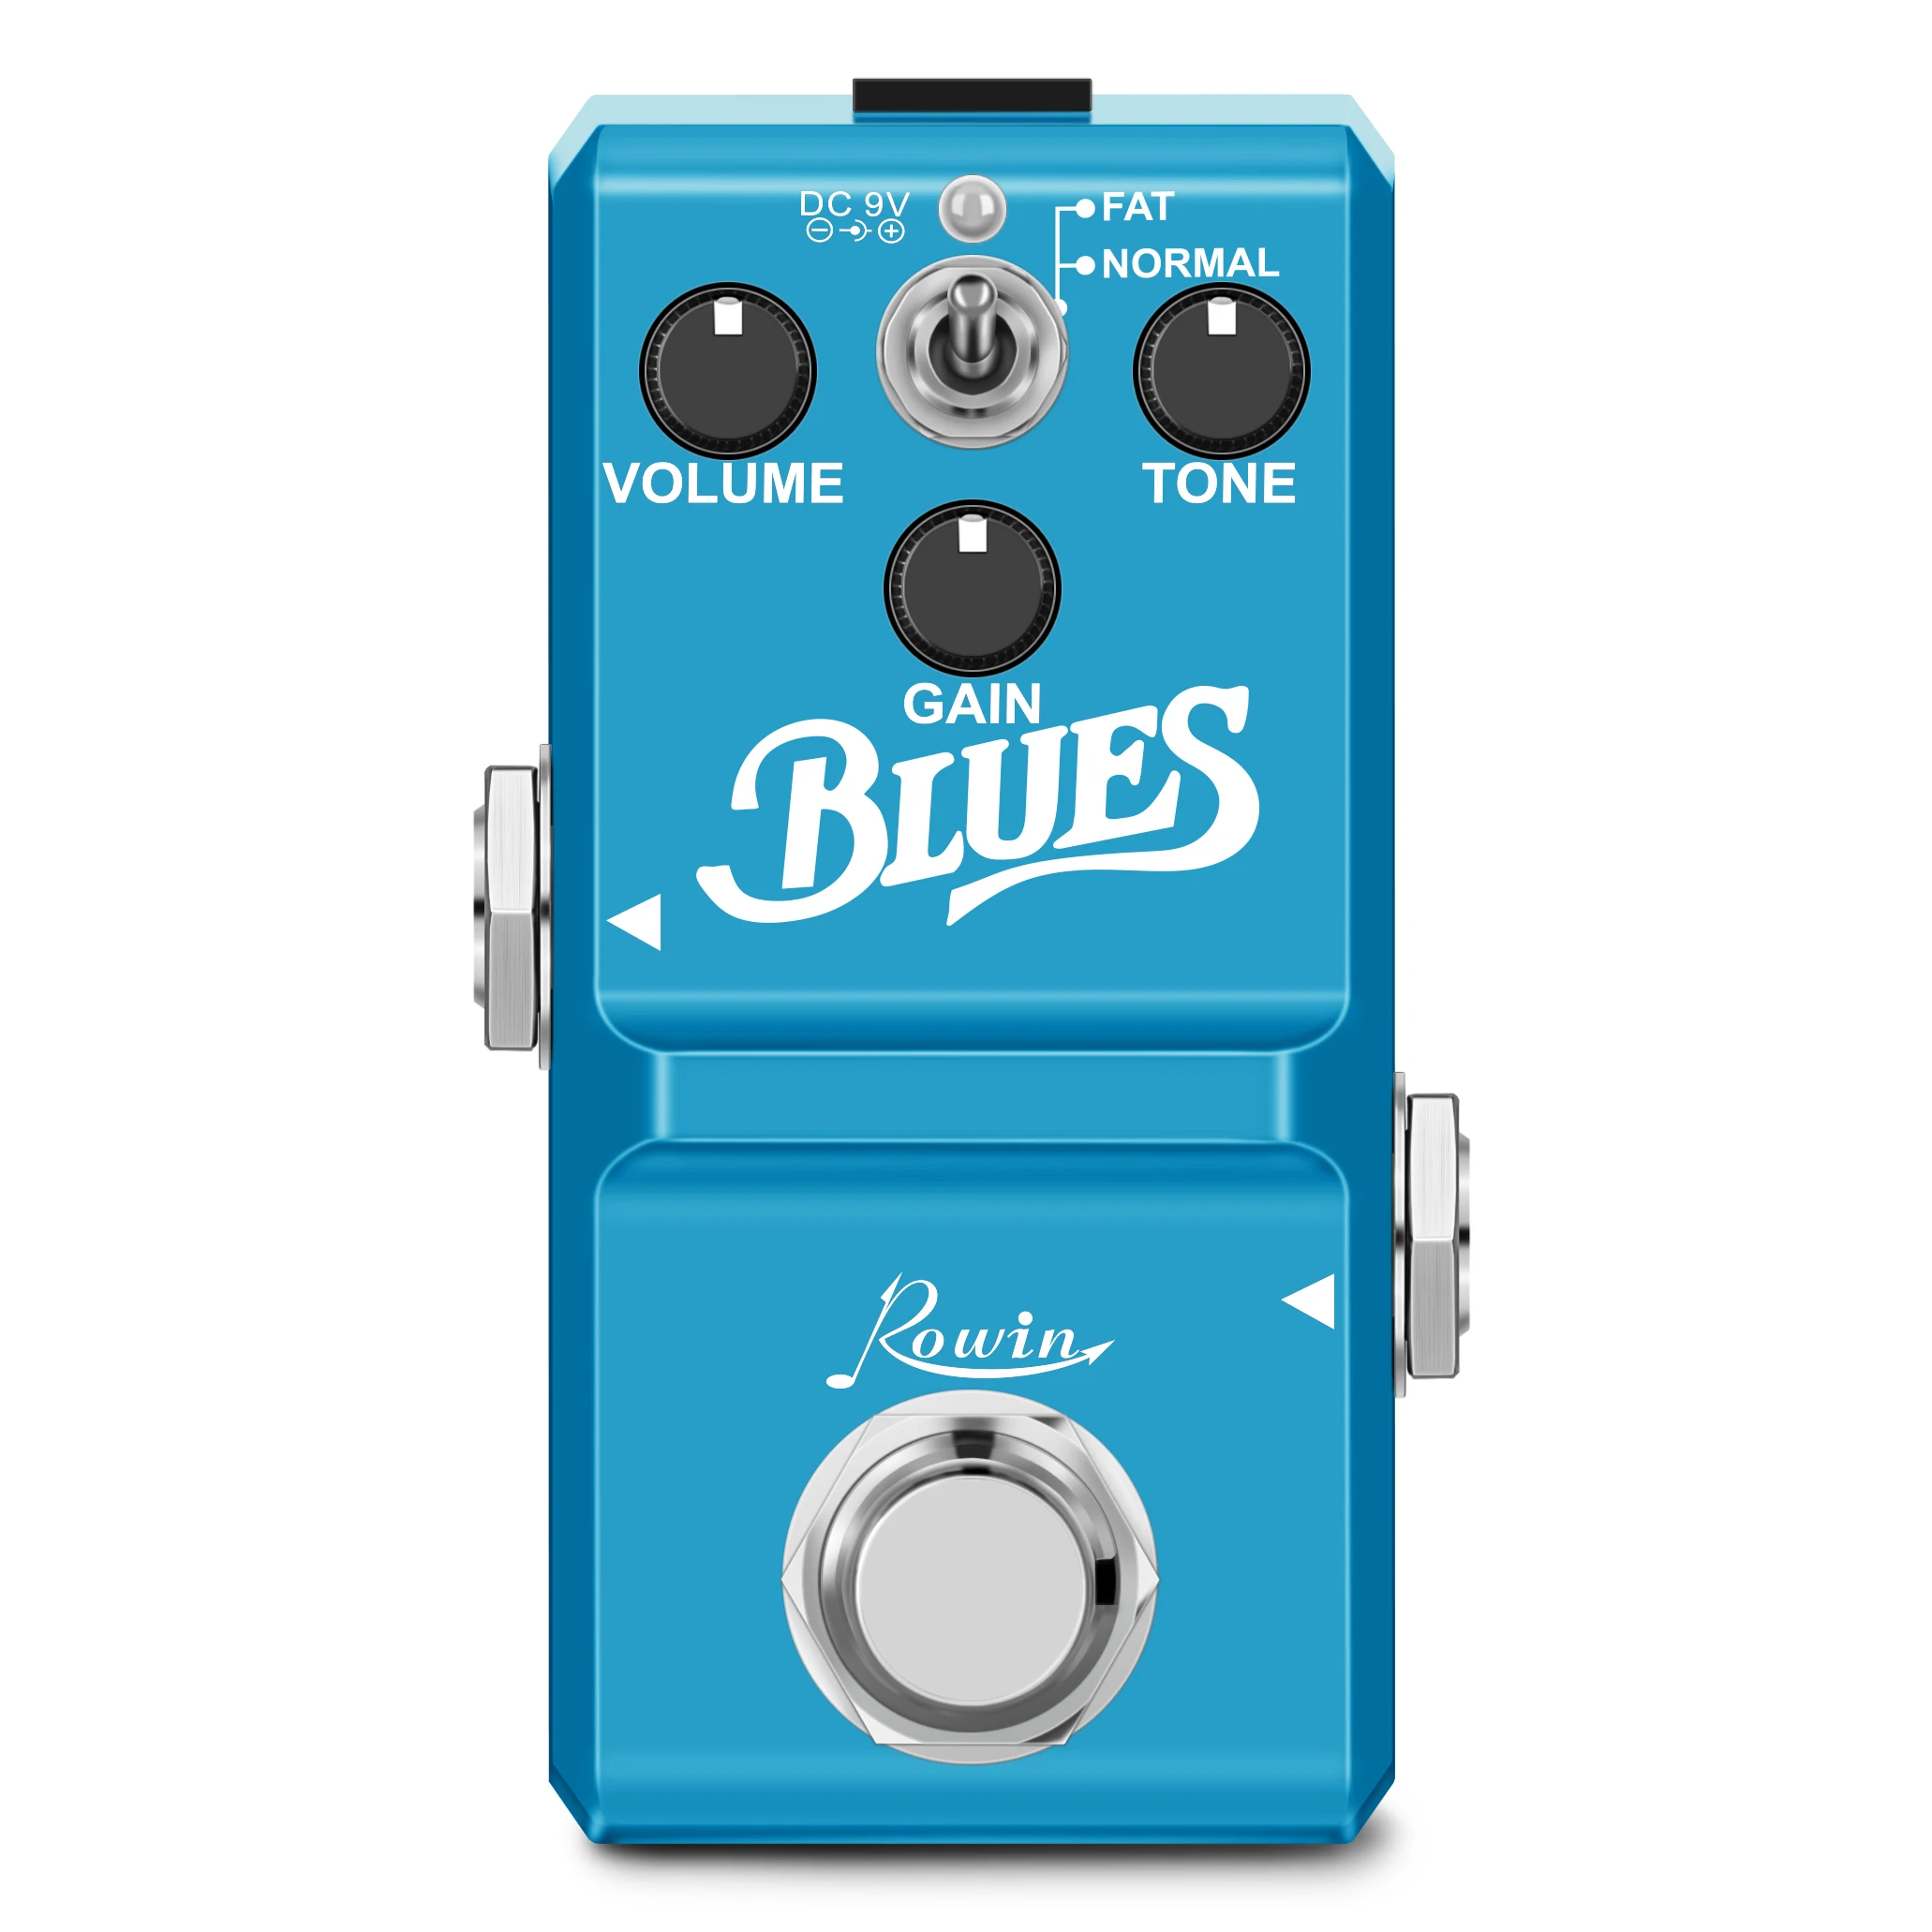 

Rowin LN-321True bypass blues electric guitar pedal overdrive pedal Guitar effects capture classic blues tones with full metal